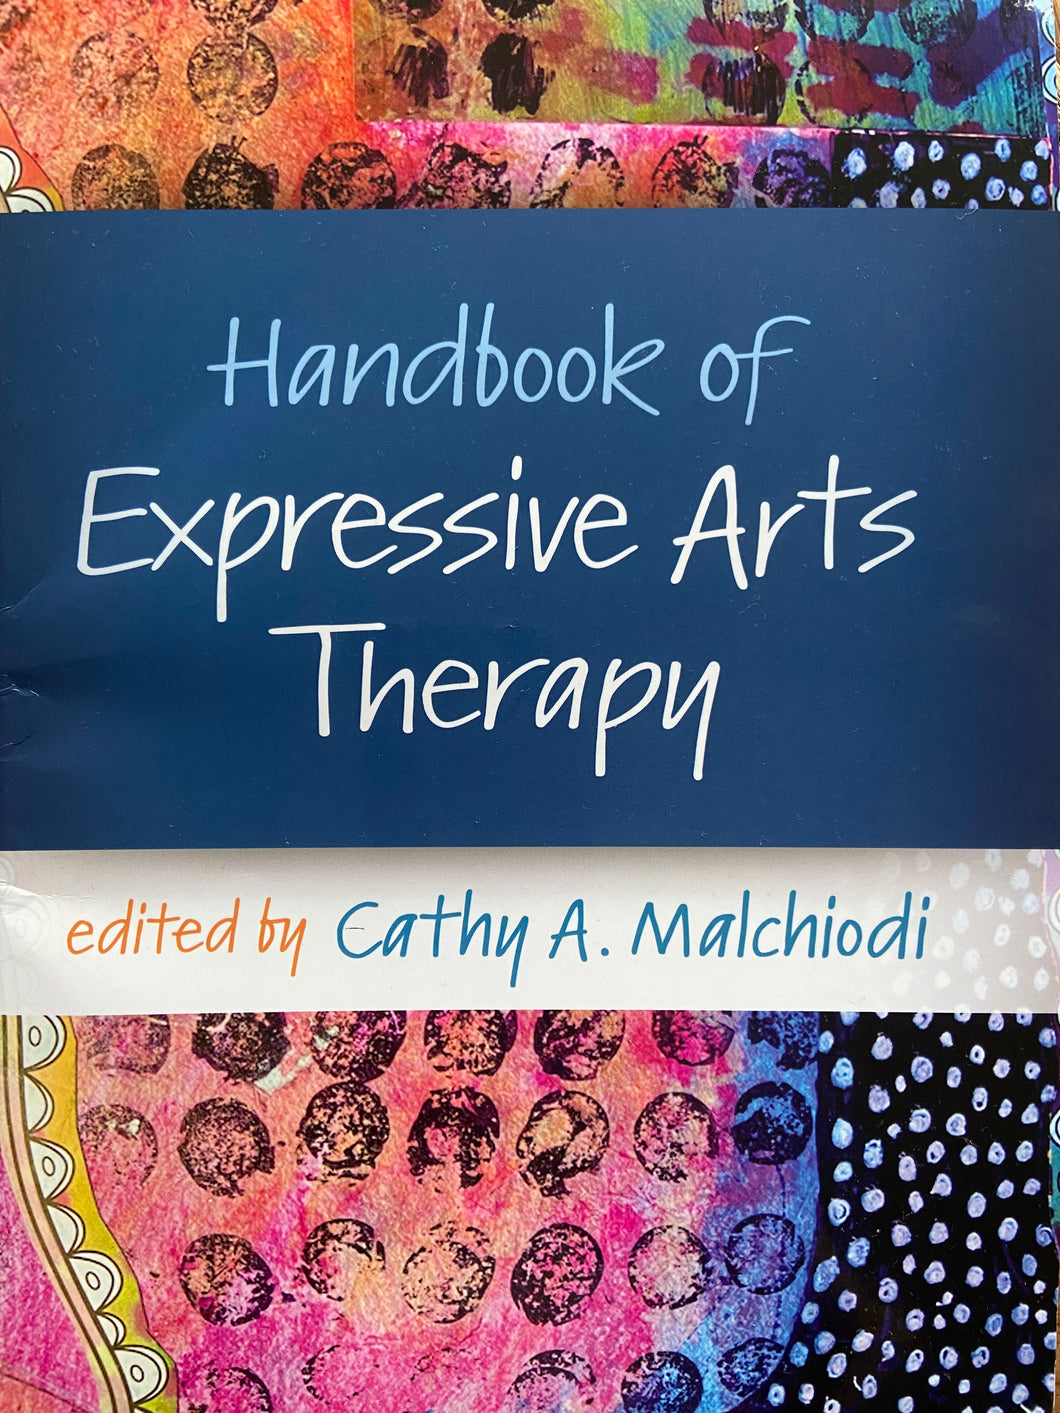 Handbook of Expressive Art Therapy